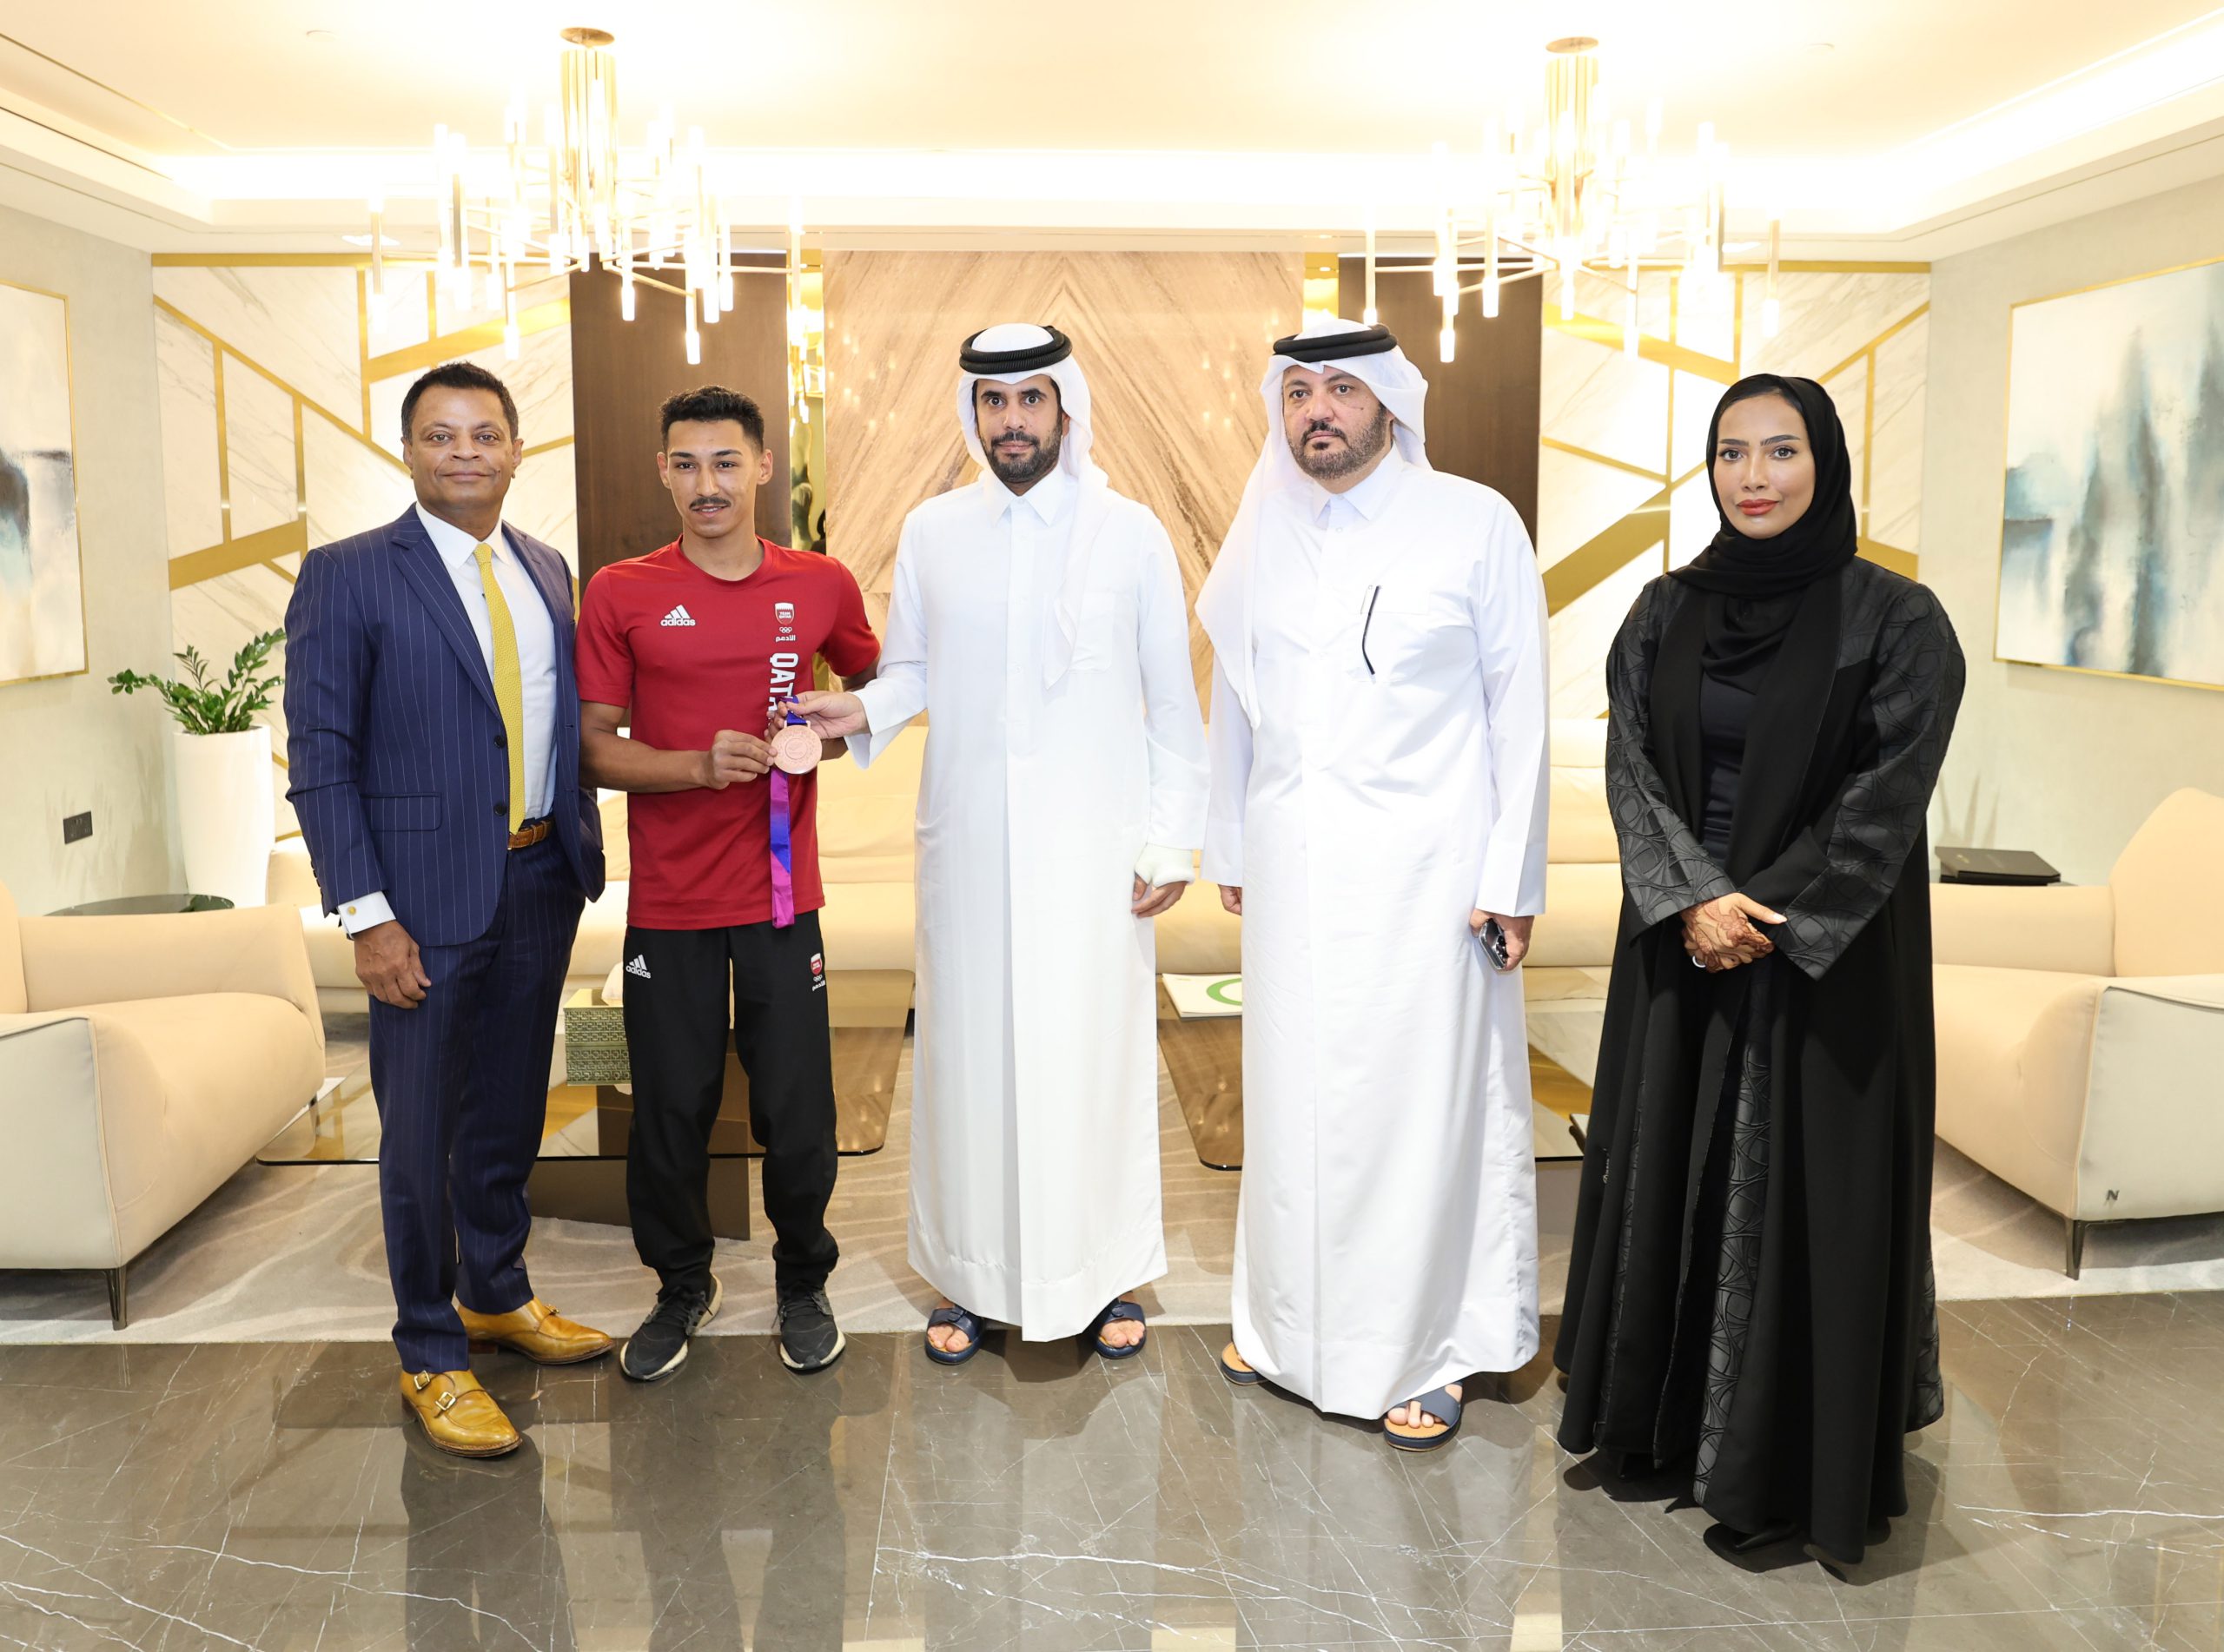 As a part of its Social Responsibility Program GWC Sponsors Sports Champion Ali Arshid